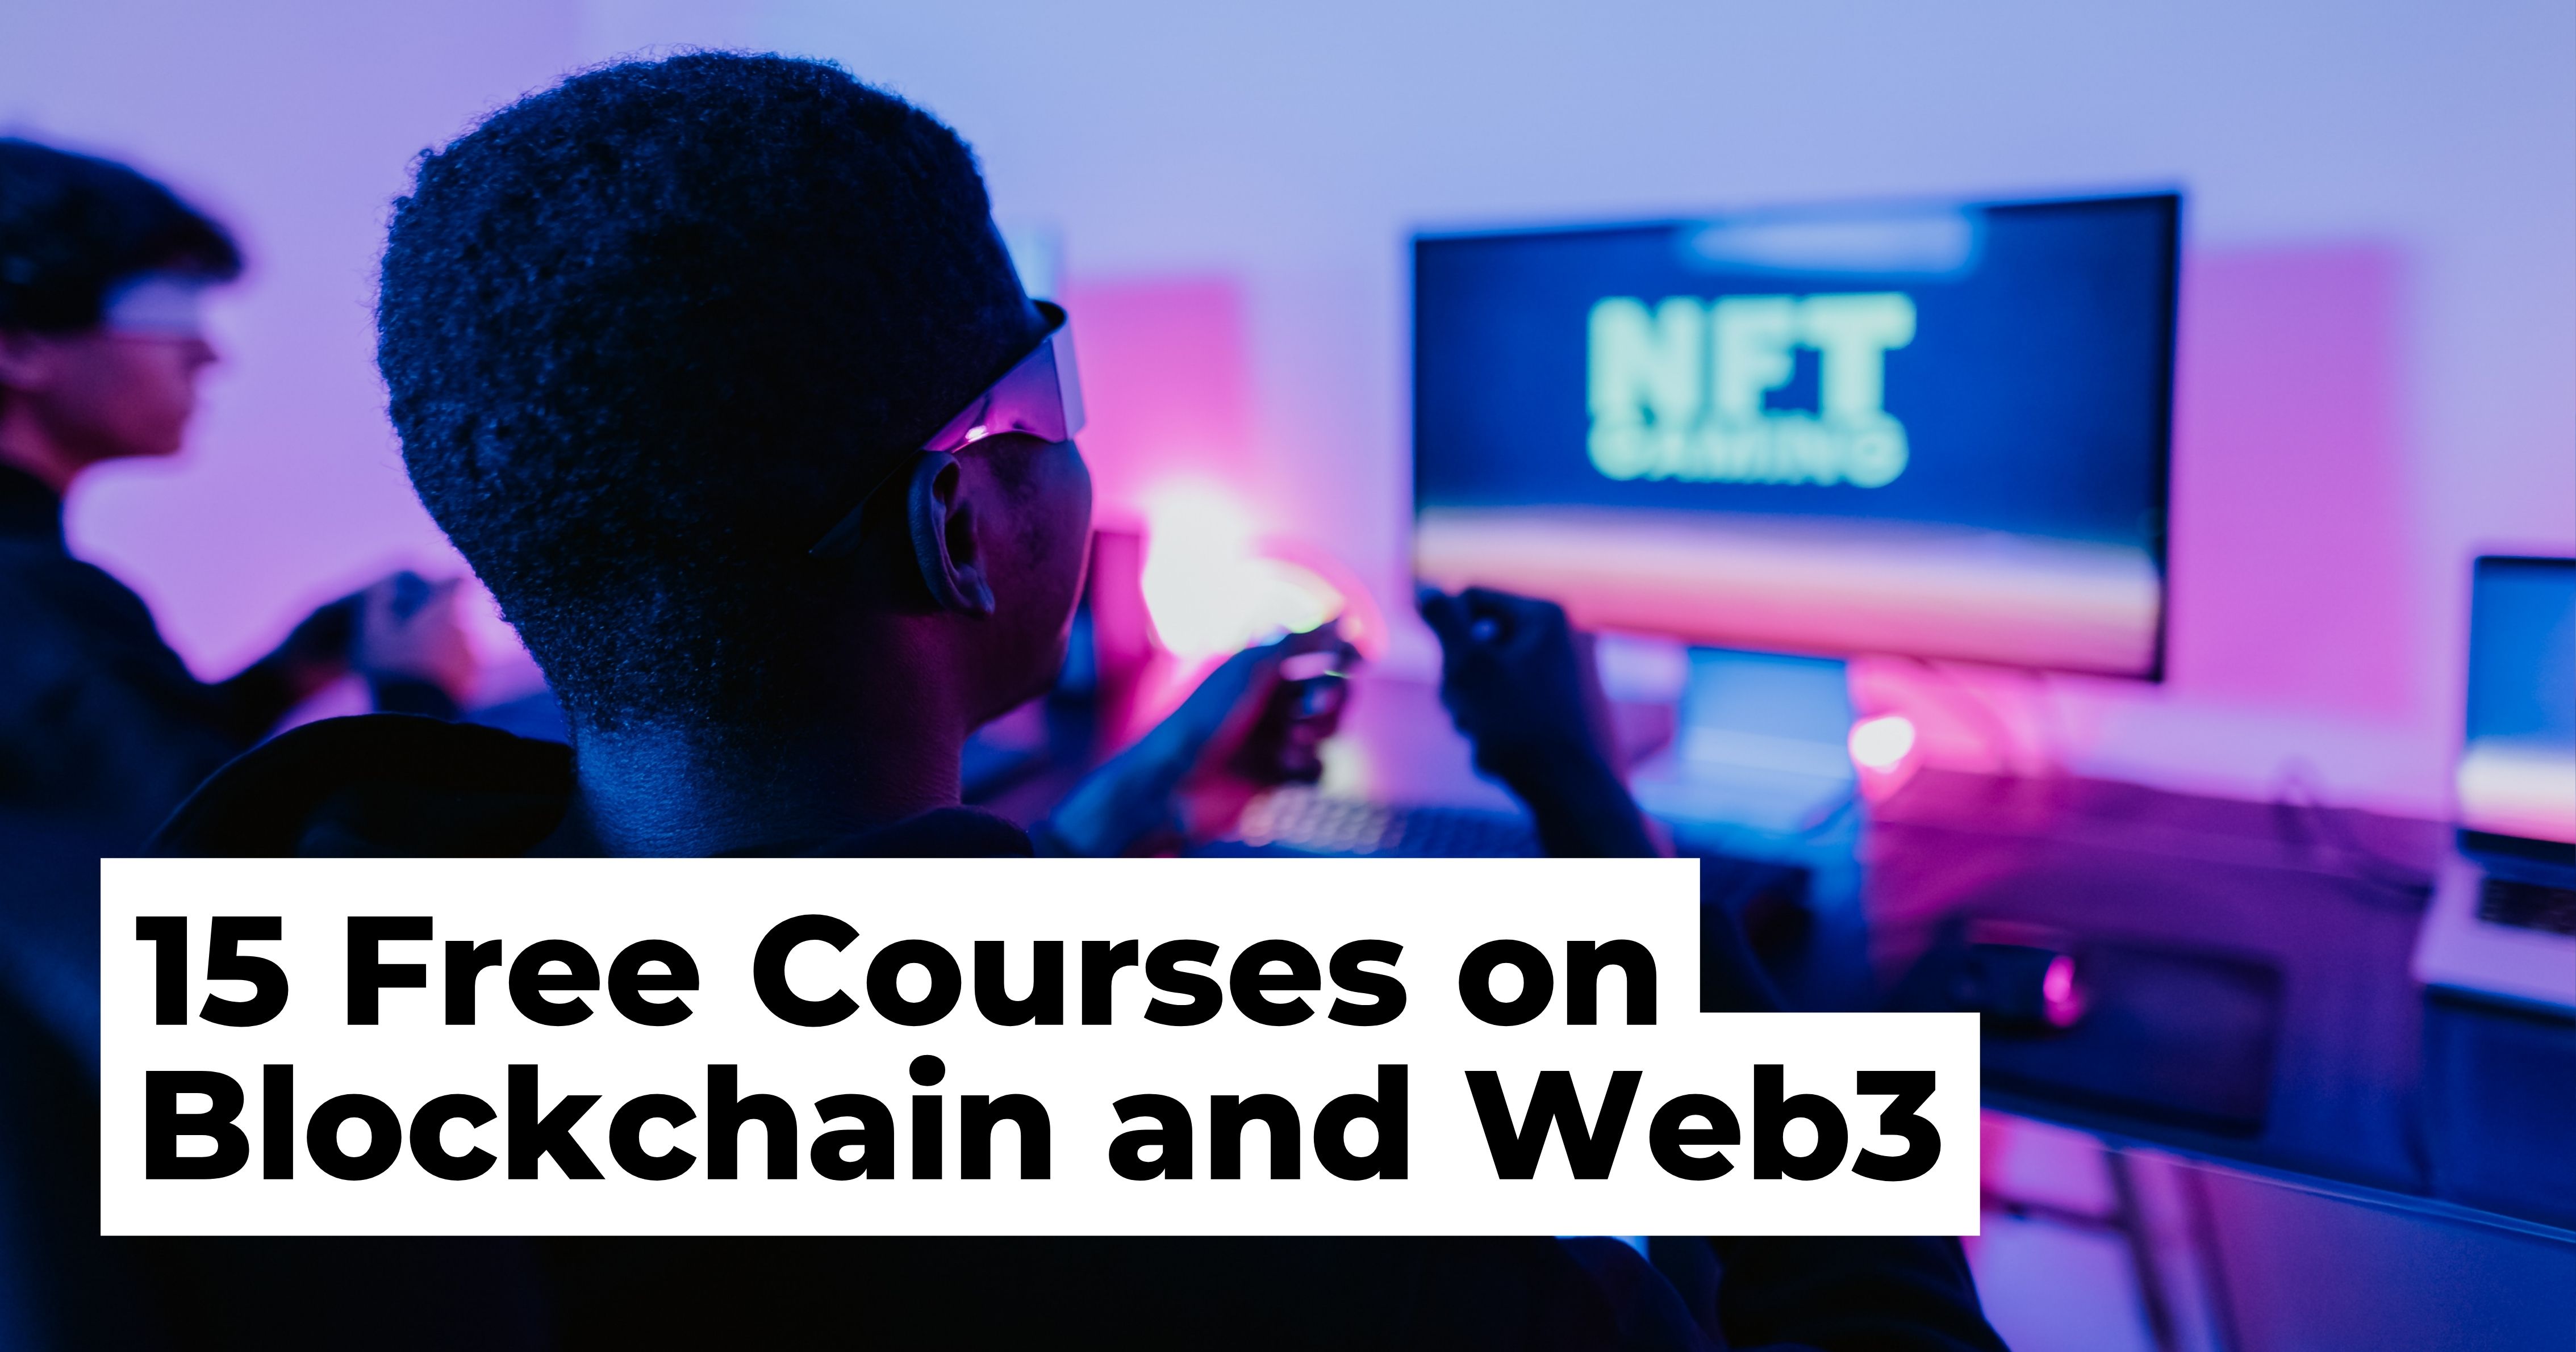 15 Free Courses on Blockchain and Web3 - Learn blockchain and land your next crypto job